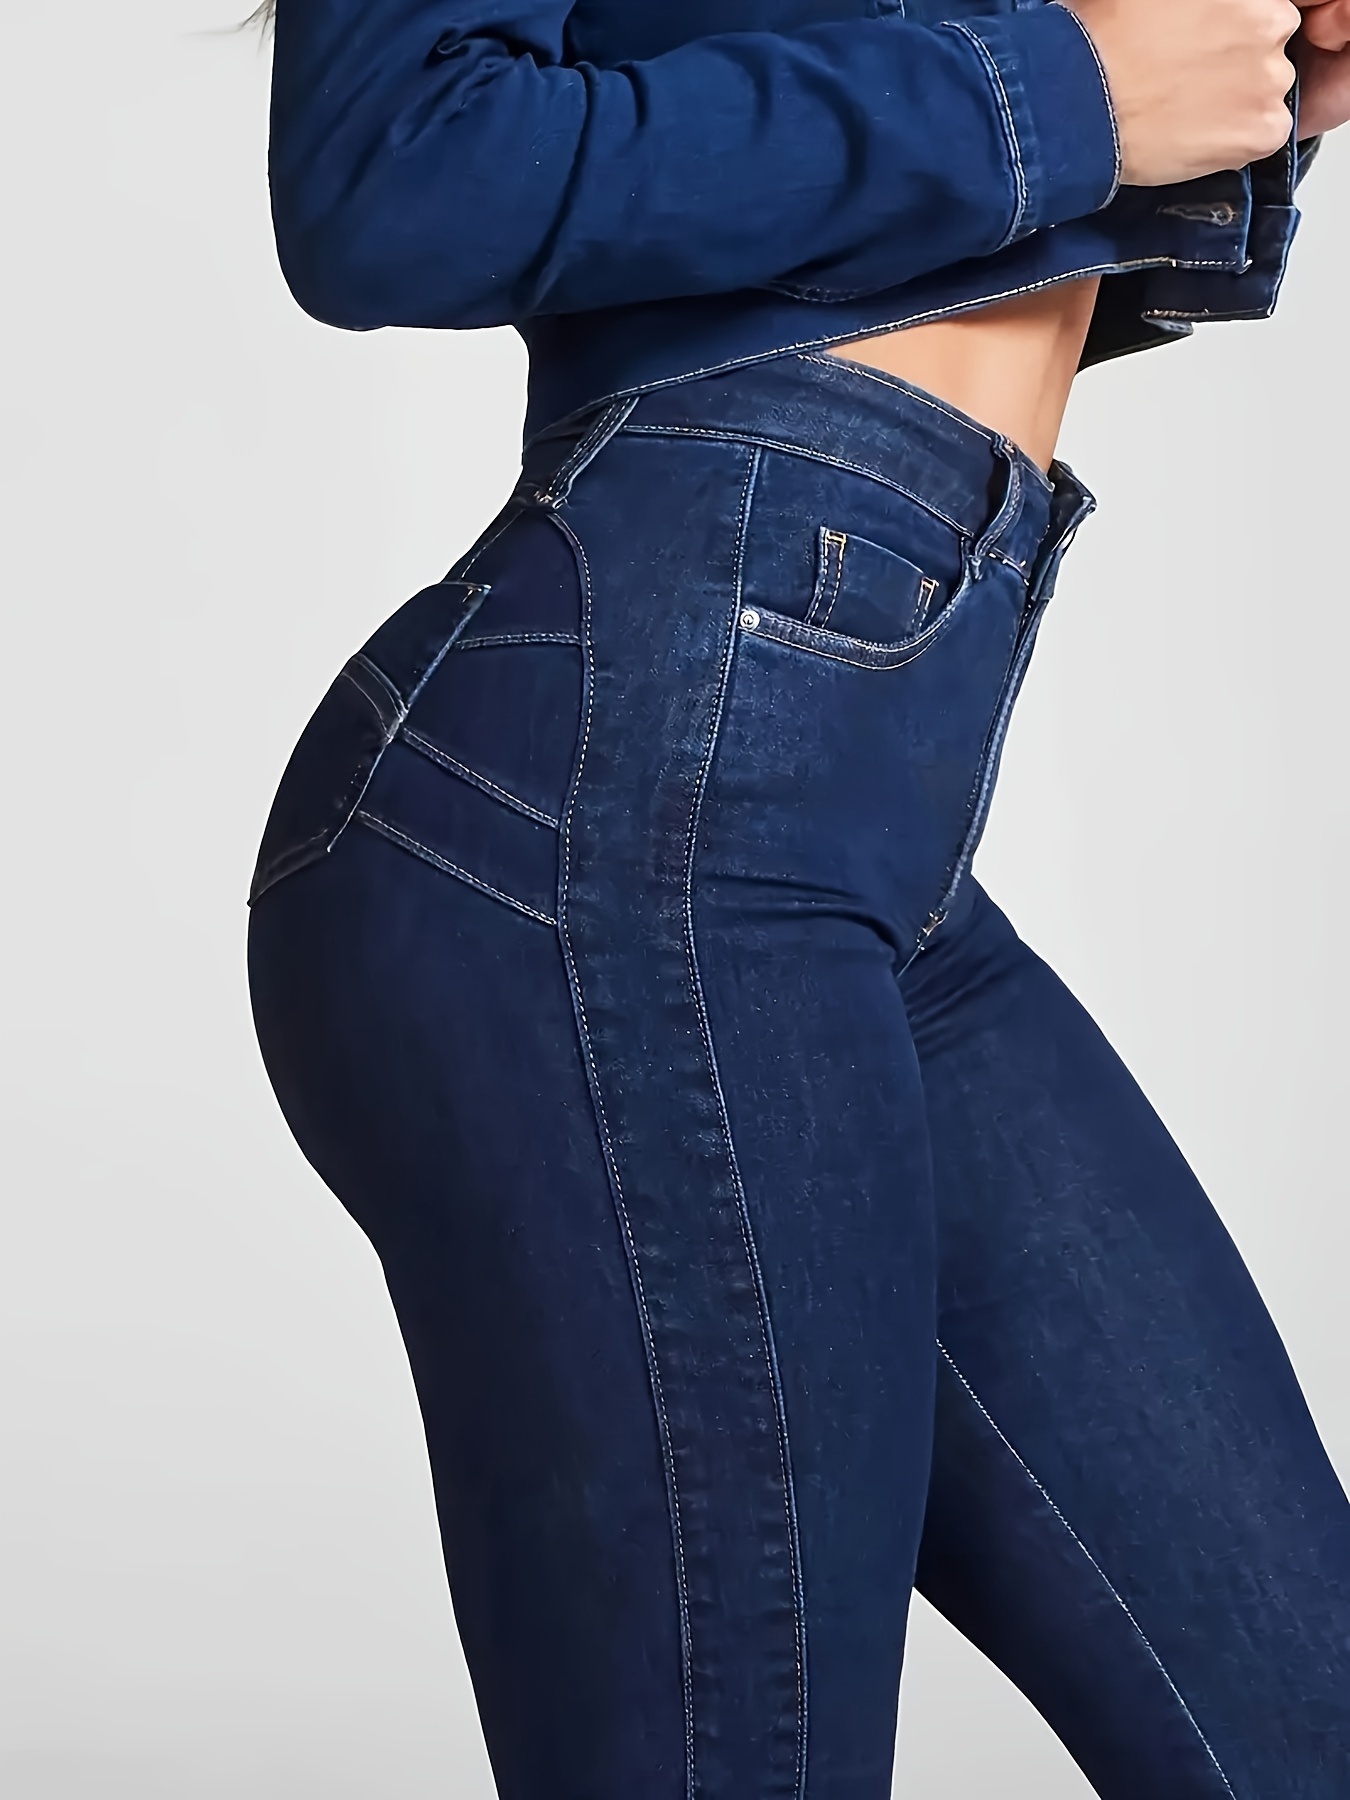  Stretch Butt Lifting Jeans For Women Trendy Tummy